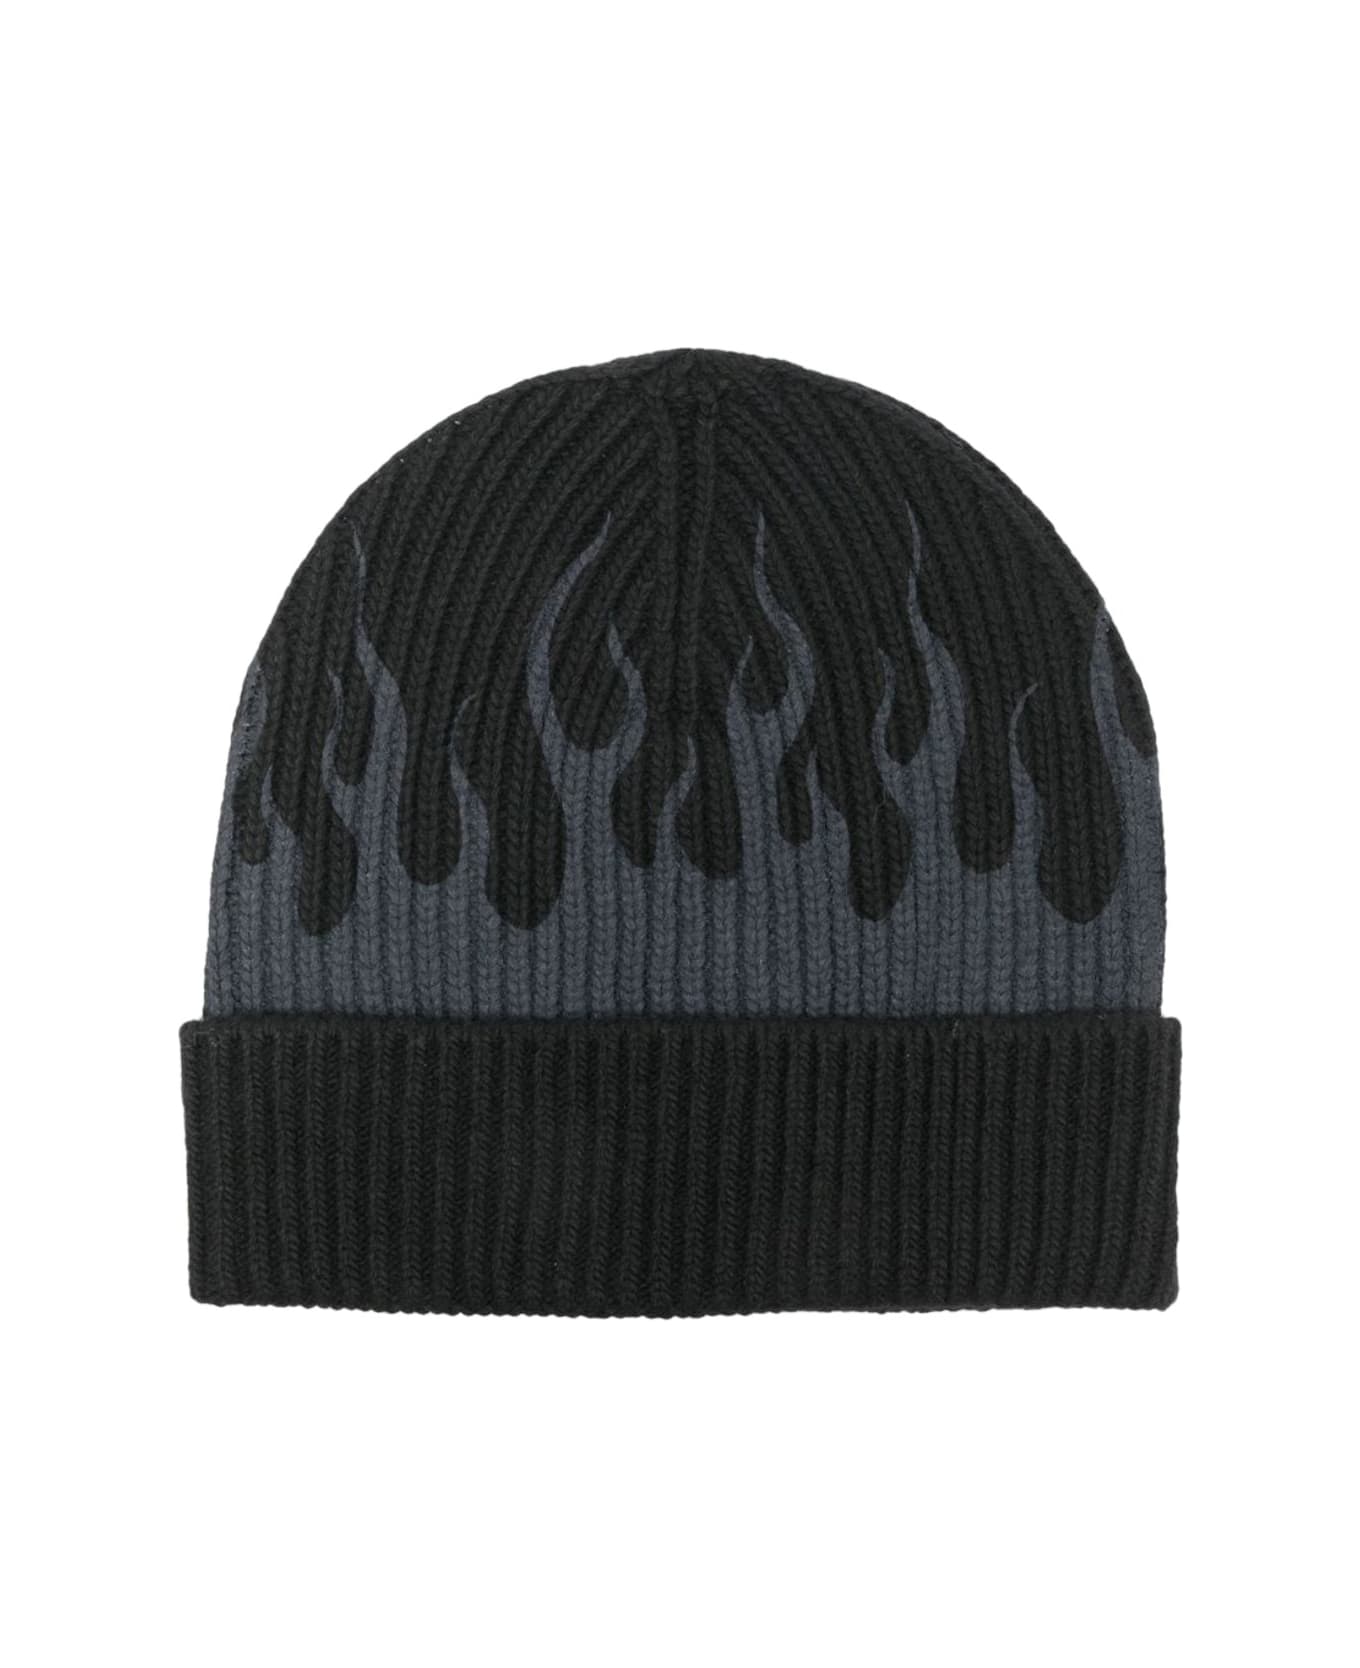 Vision of Super Beanie Grey Flames - NERO